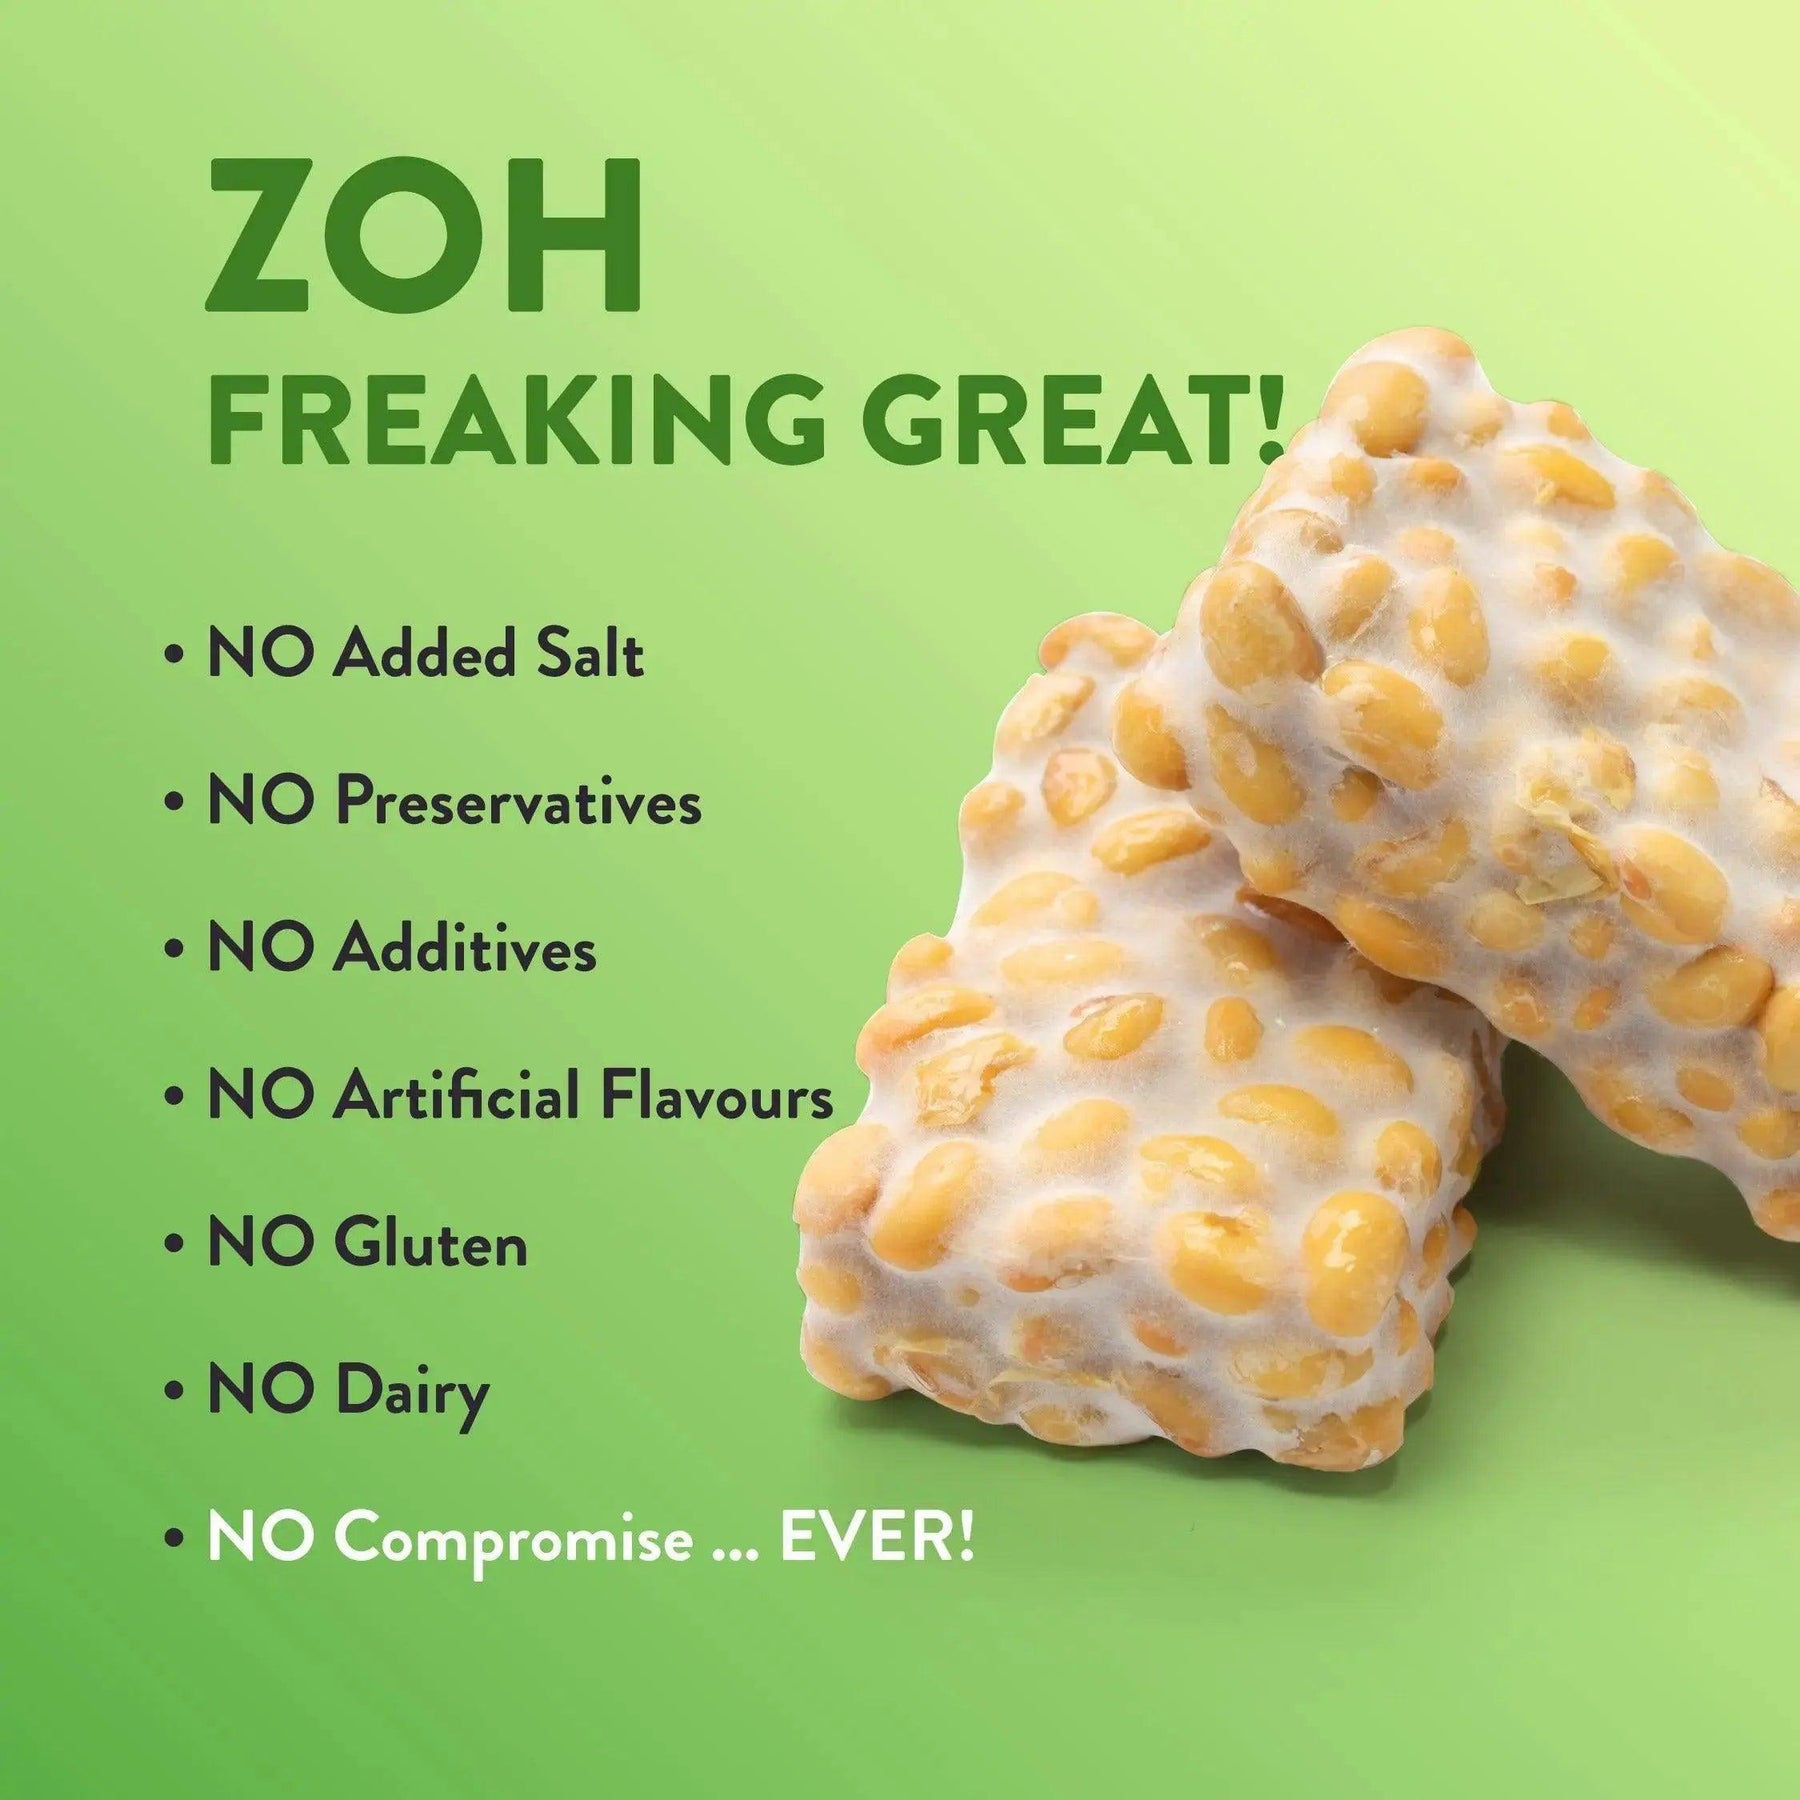 Bulk tempeh in Mumbai: Trustworthy Zoh Plain Soybean, Nutritionist-founded, Organic Ingredients, GMP